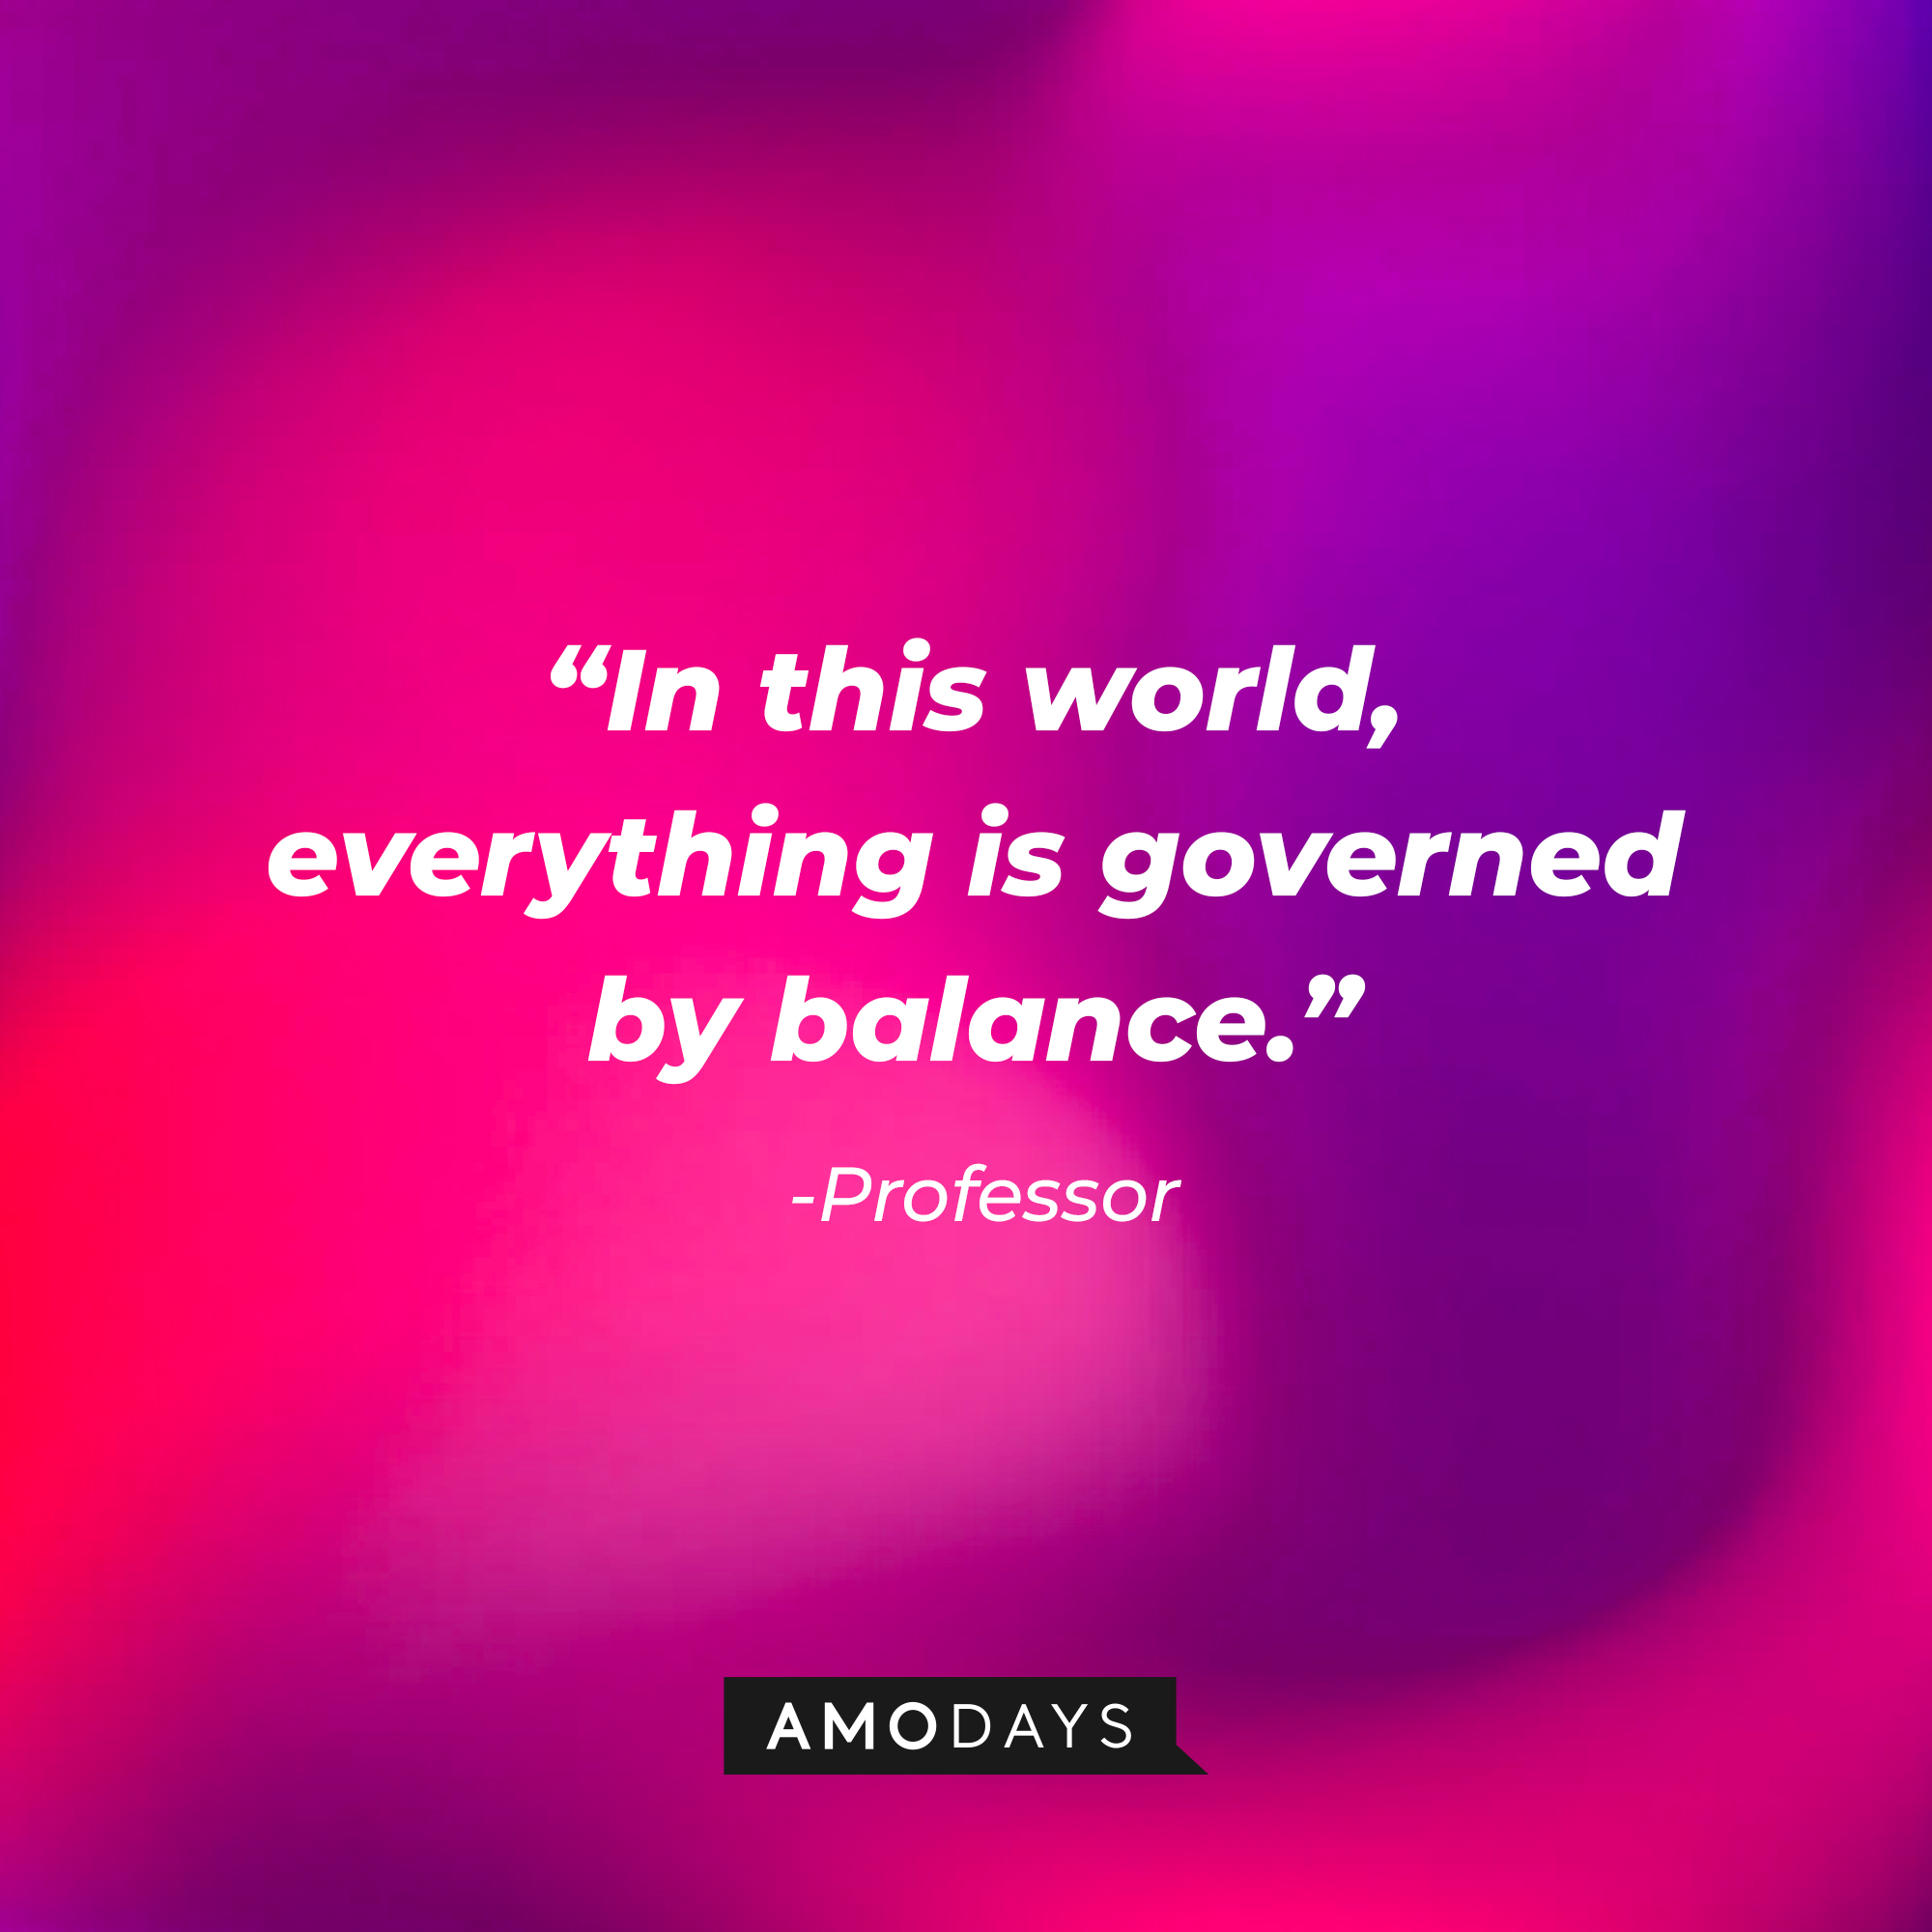 Professor’s  quote: “In this world, everything is governed by balance.” | Source: AmoDays